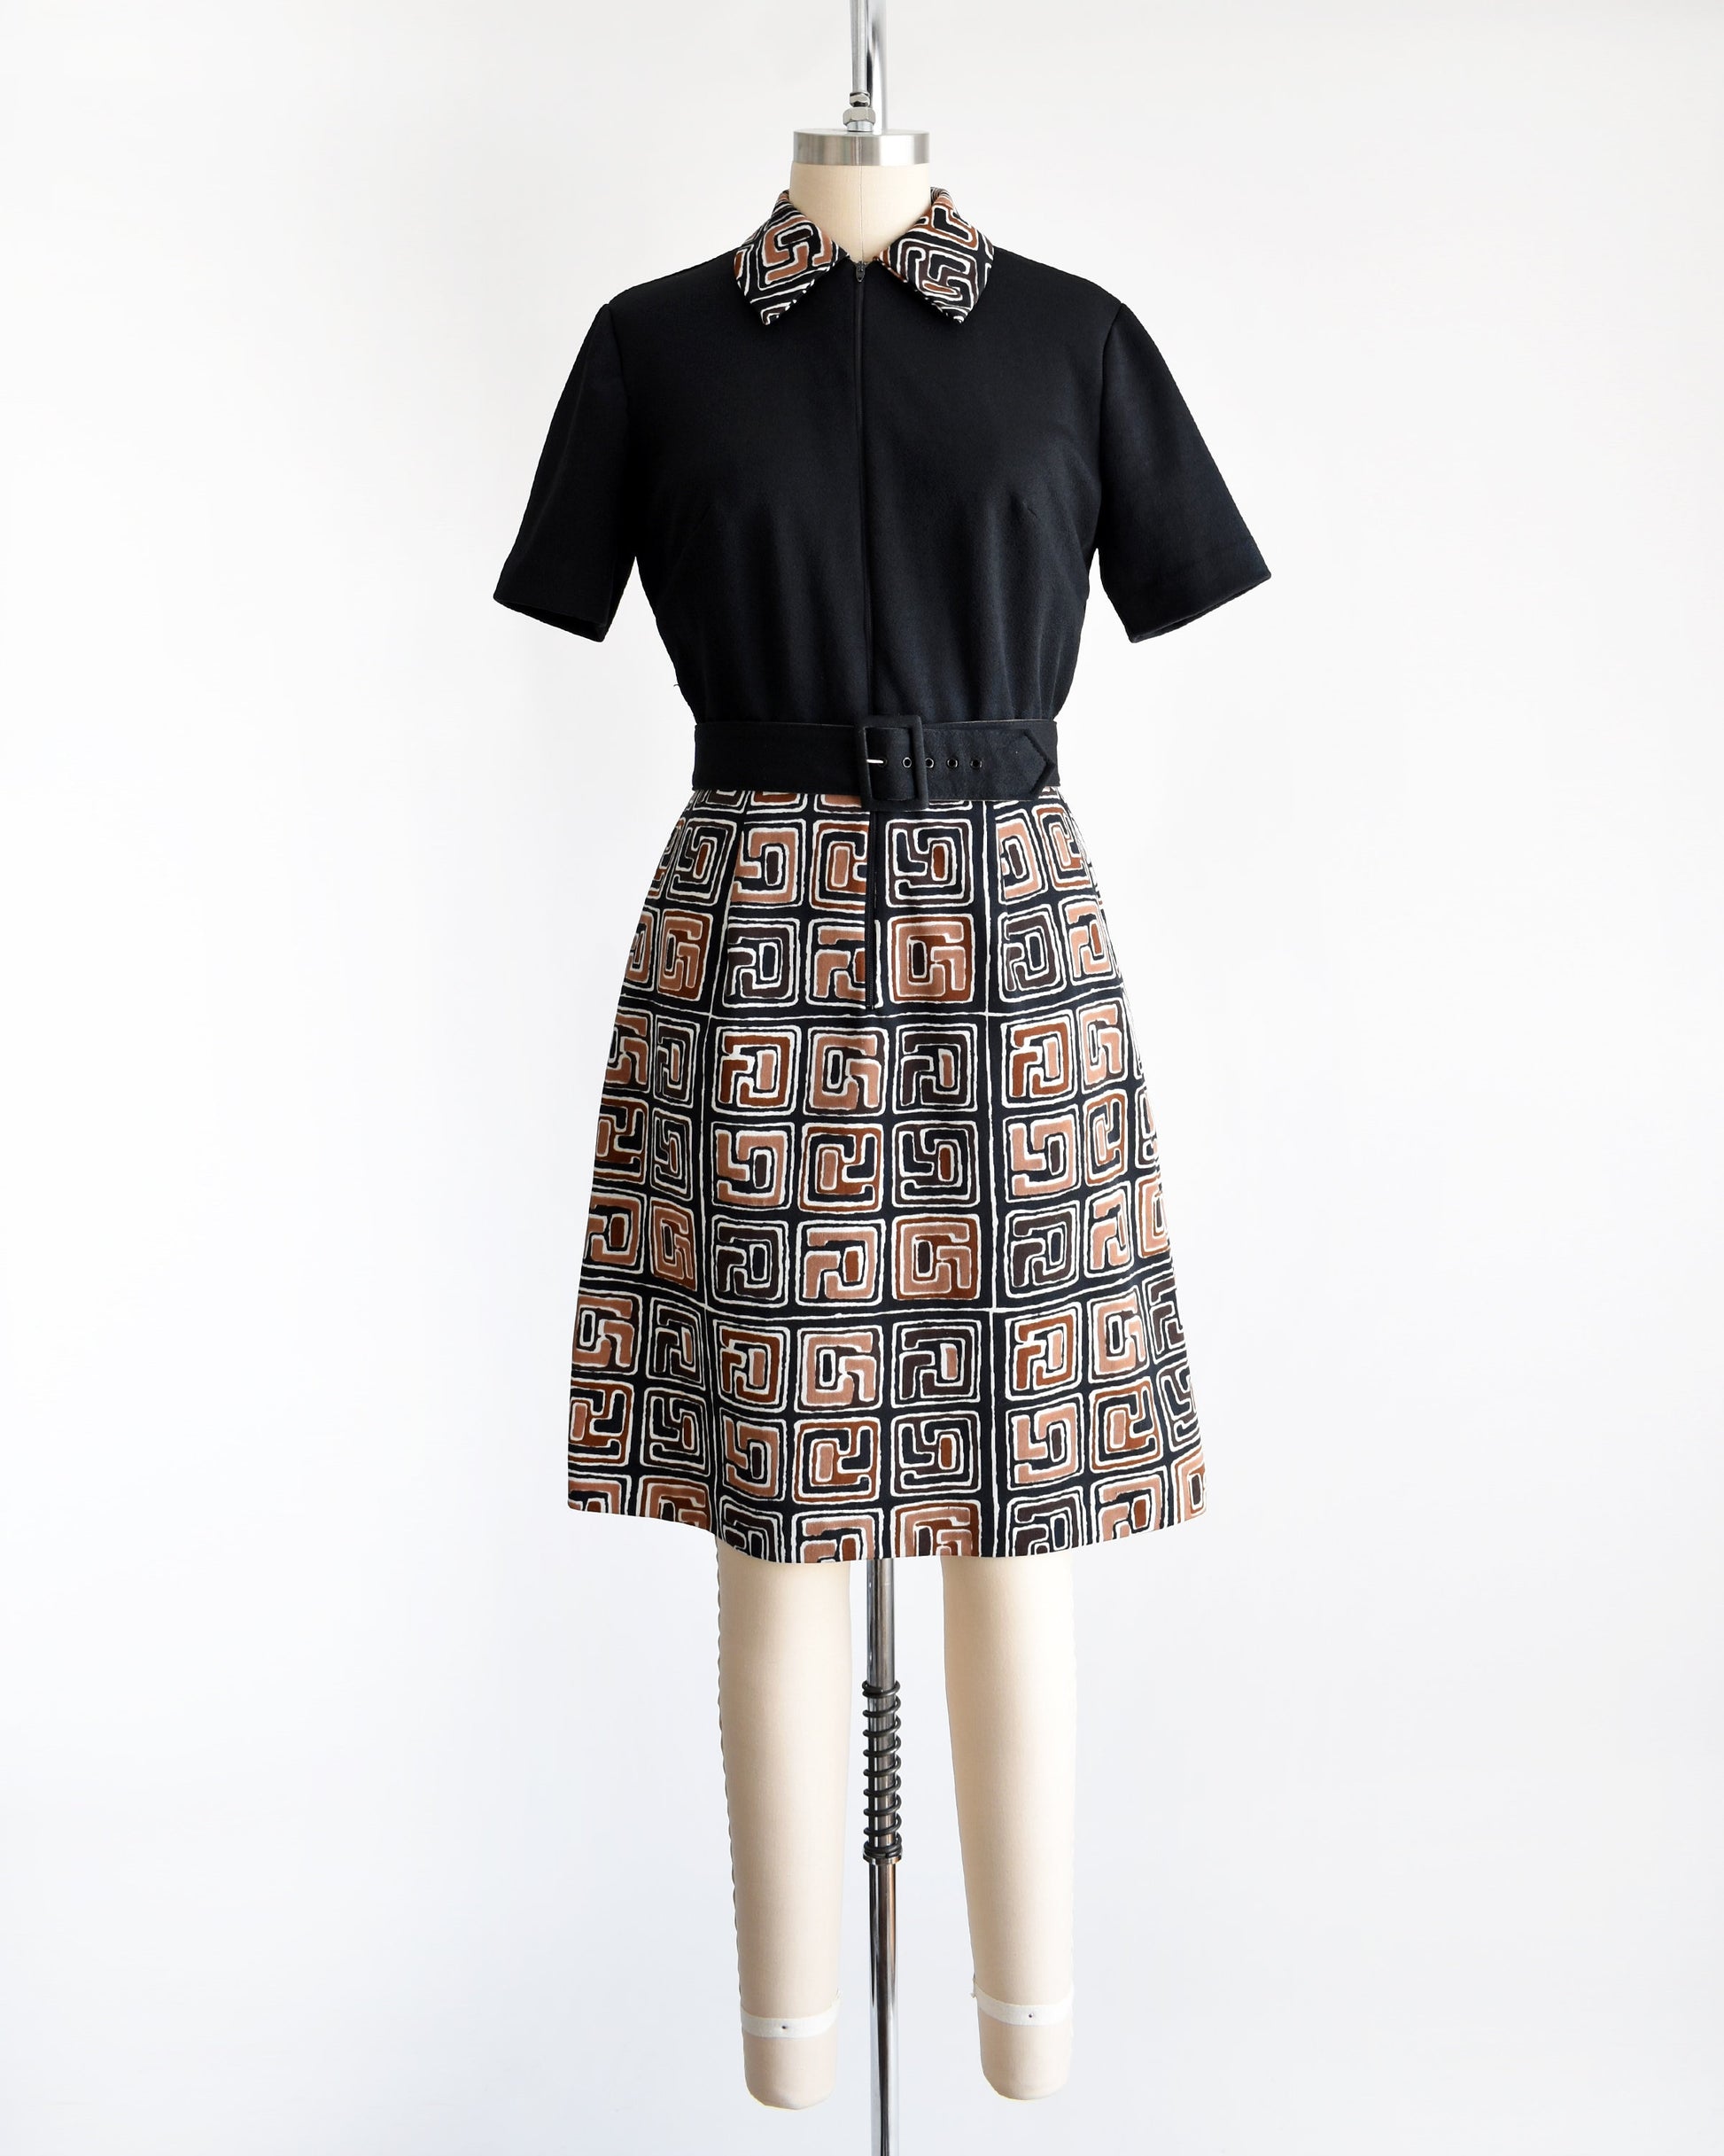 A vintage 60s dress that has a matching geometric print brown, black and white collar and skirt. Zip up front which is zipped down to expose more of the collar. Matching black belt. Short sleeves. The dress is on a dress form.